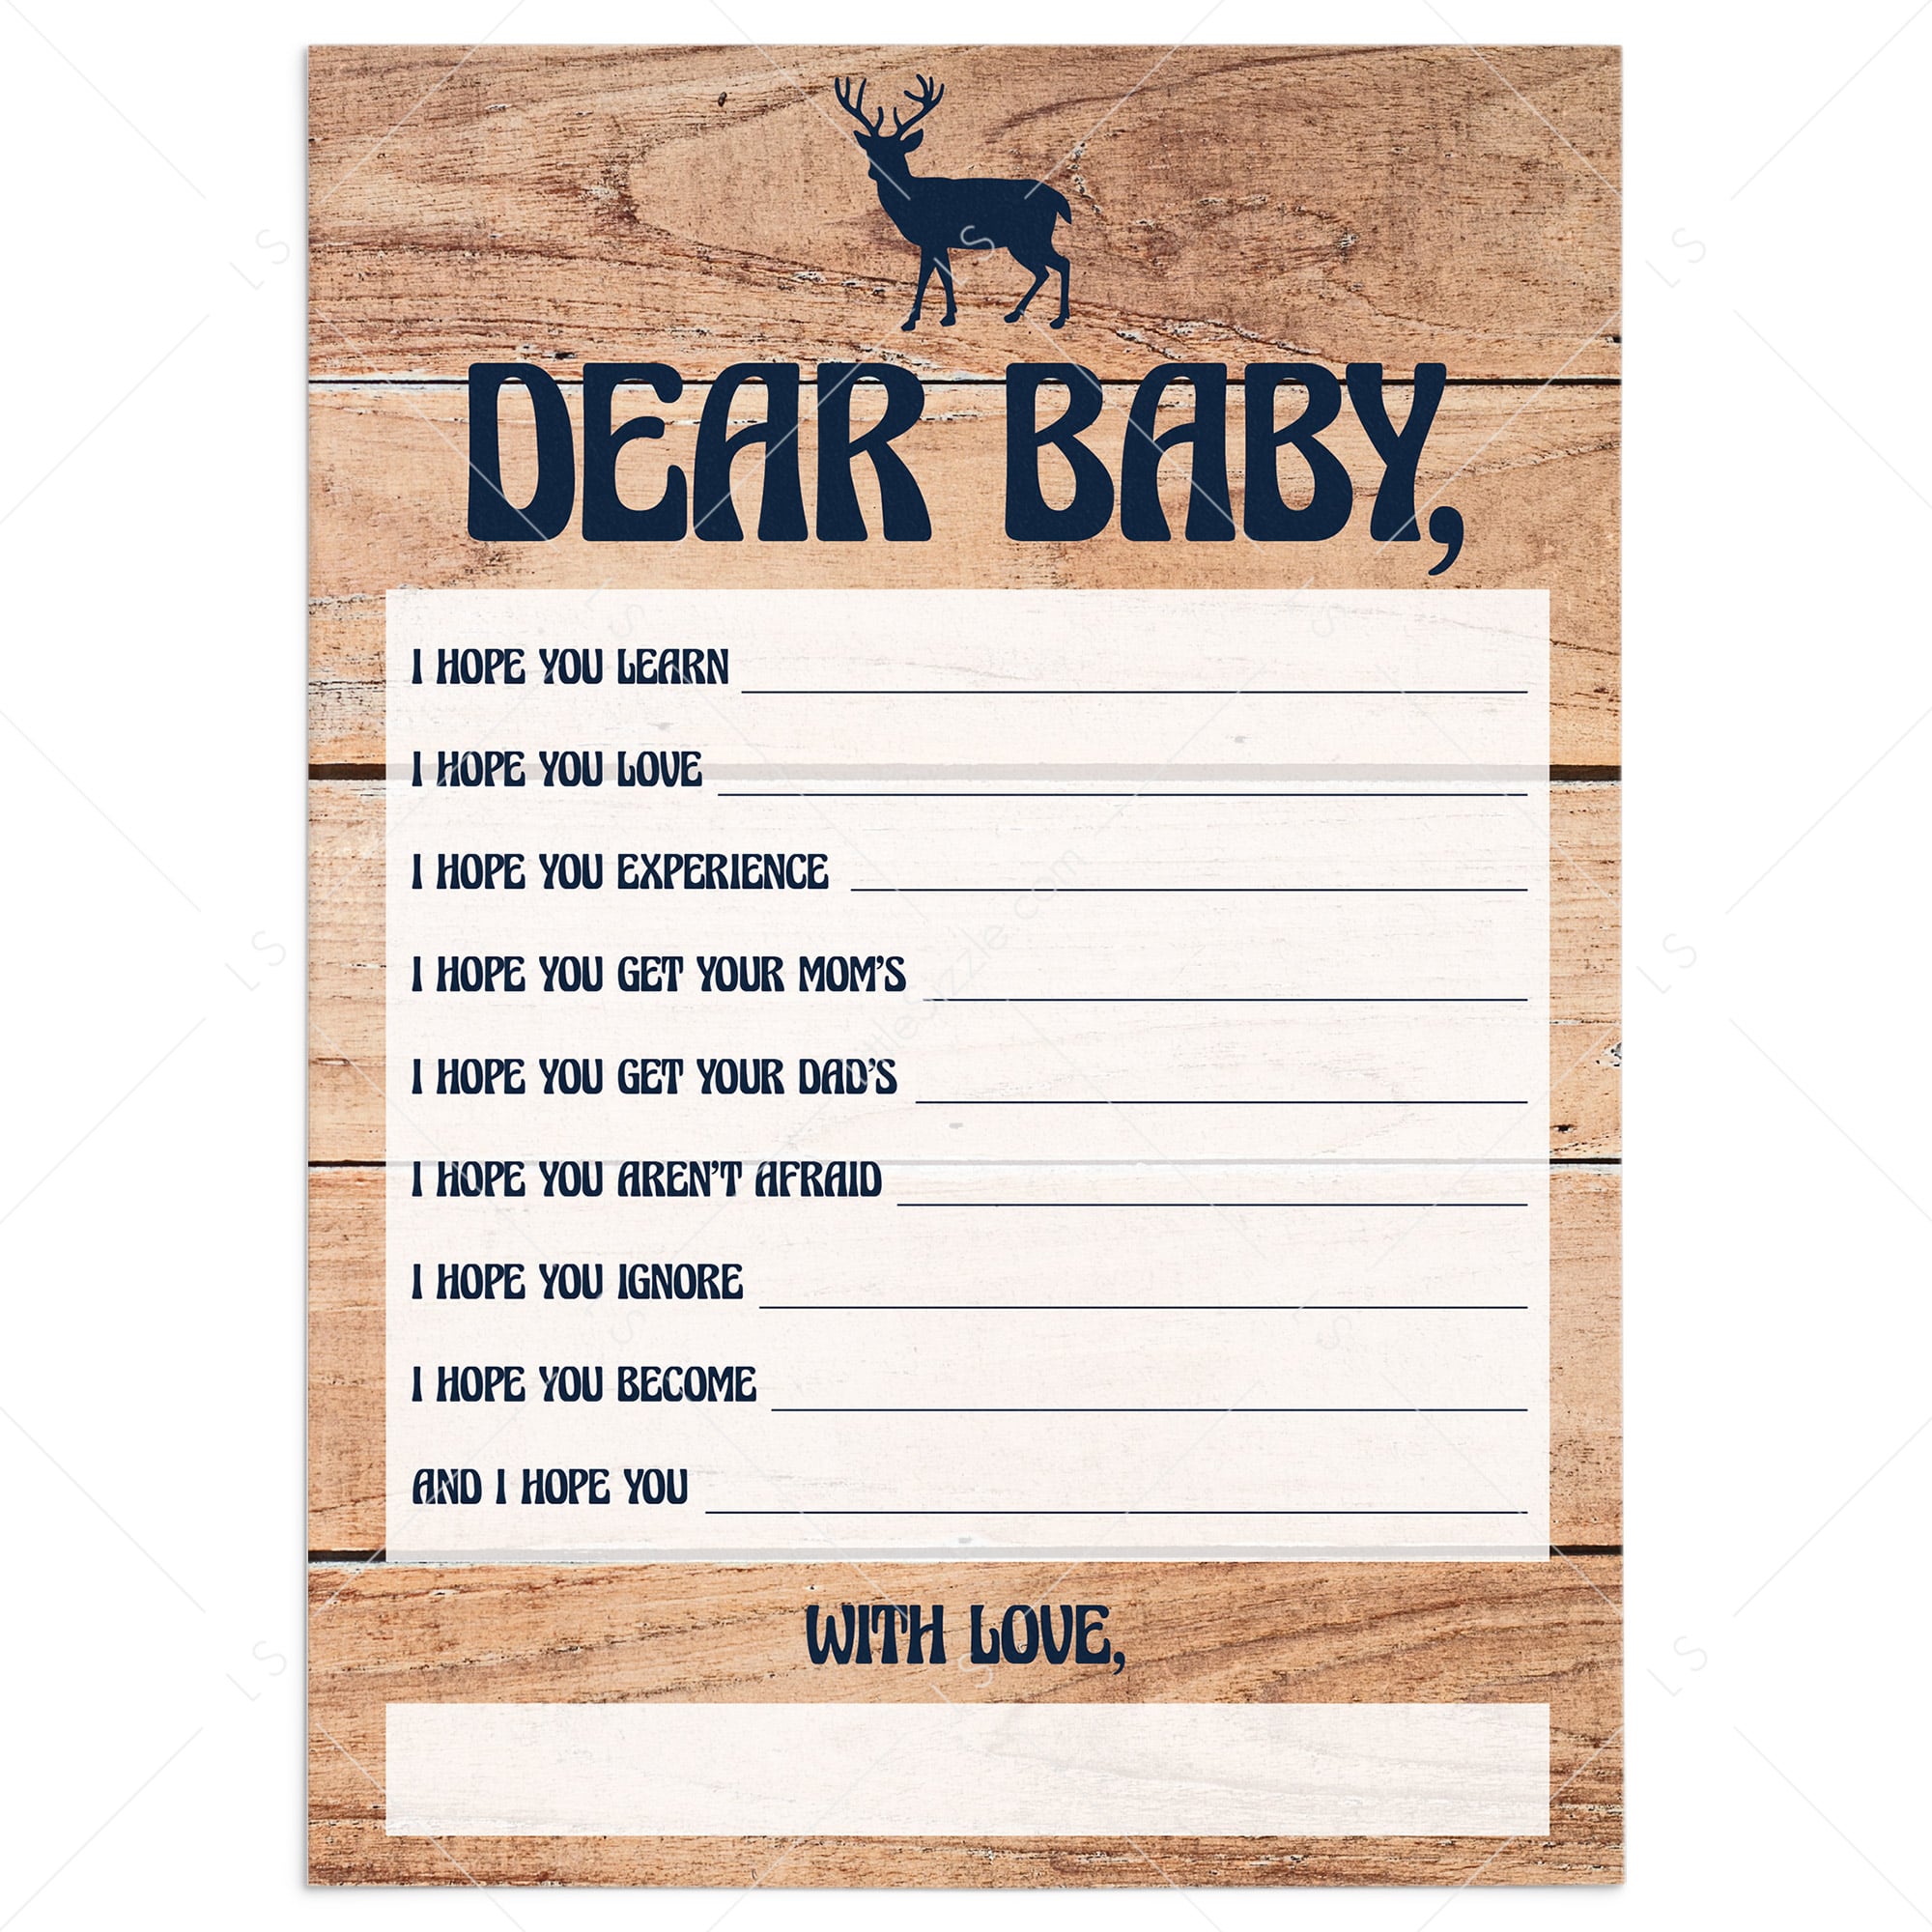 Dear baby shower game cards printable by LittleSizzle